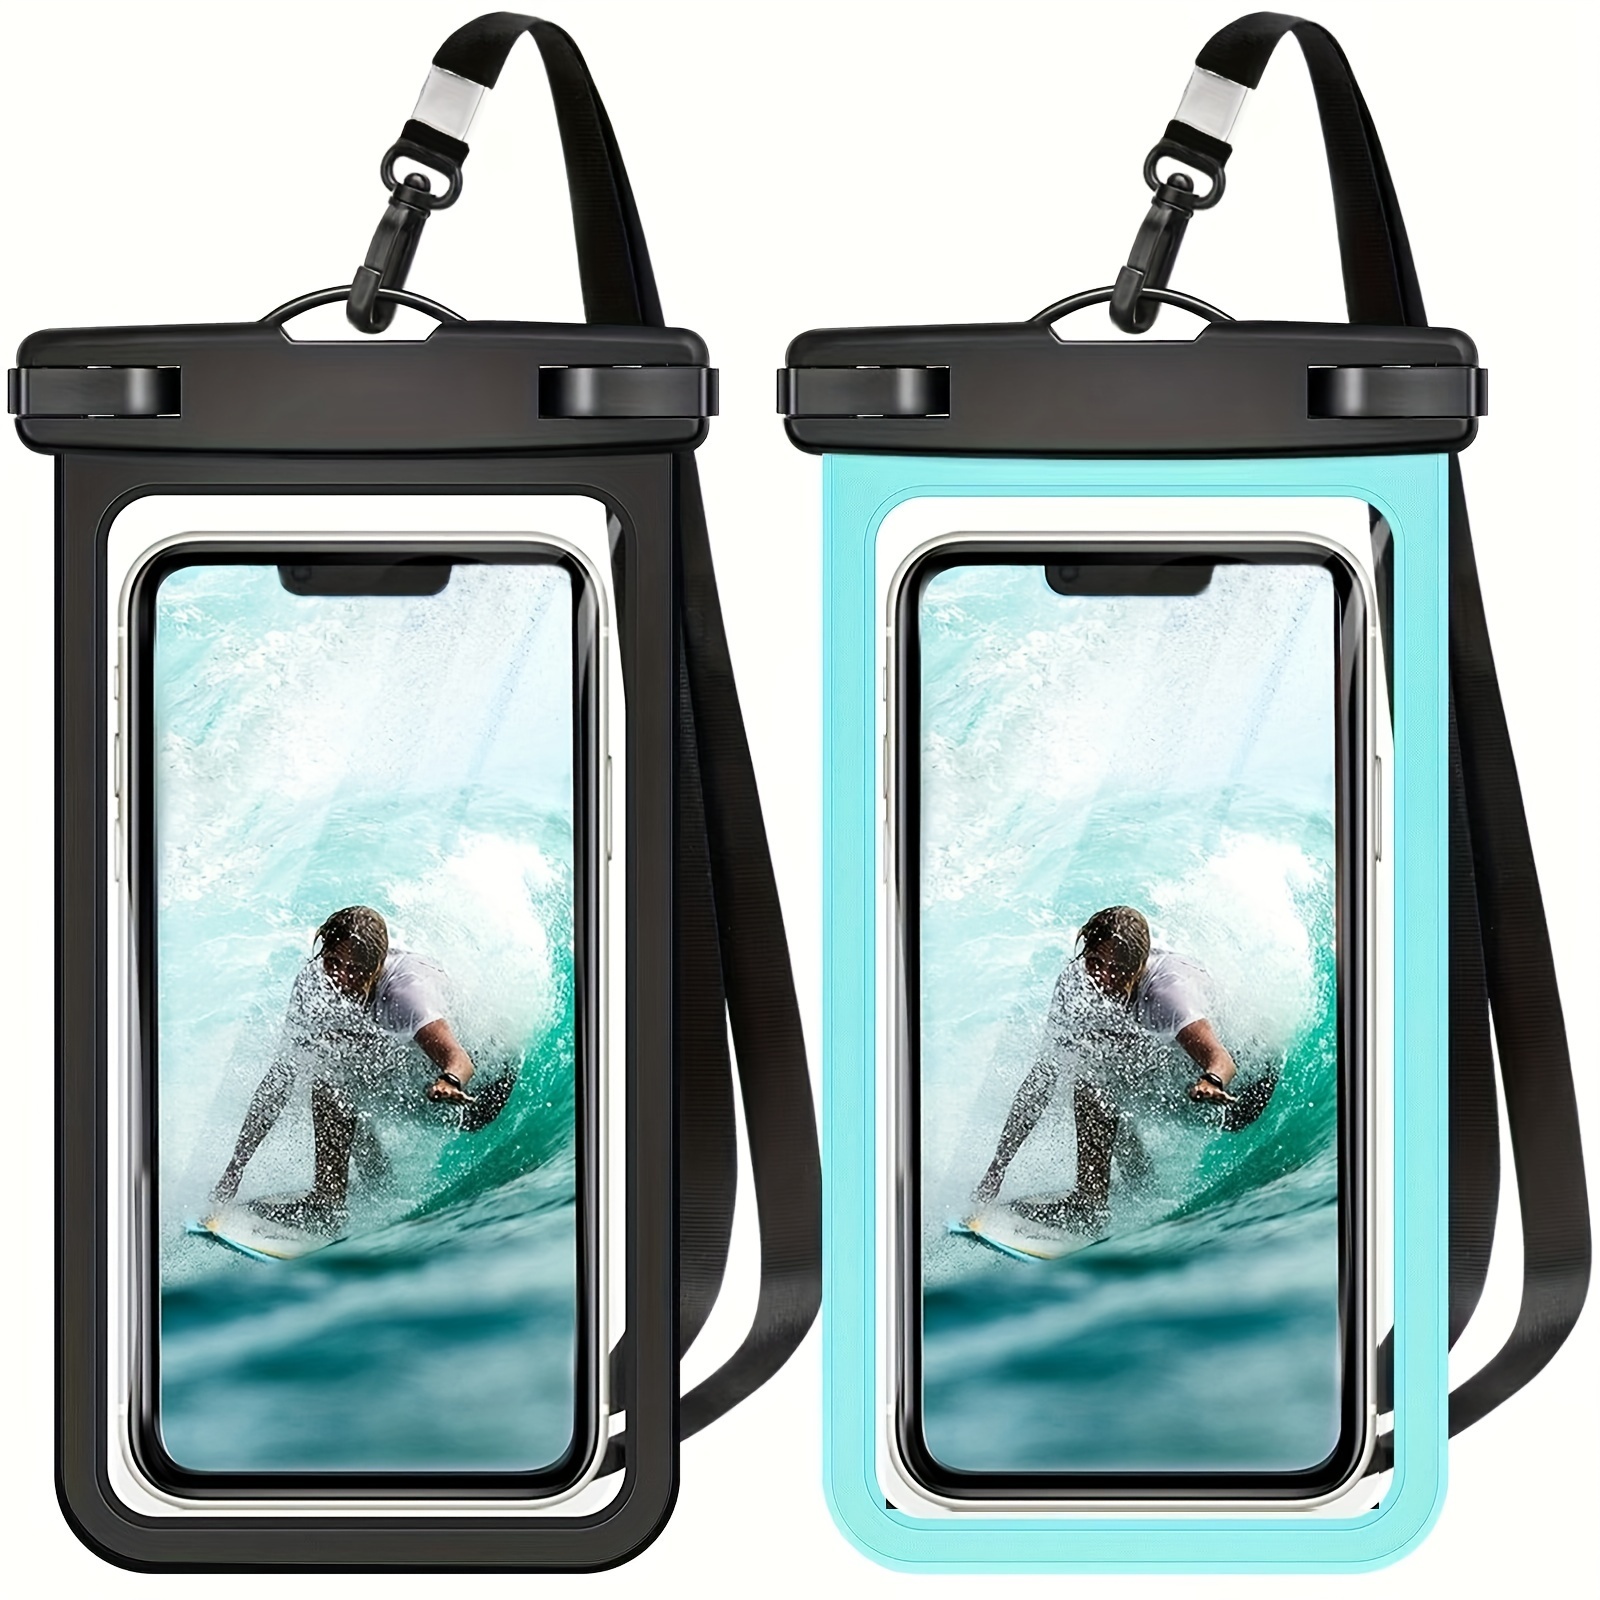 

2 Packs Universal Waterproof Phone Pouch - Waterproof Case For 14 13 12 11 Pro Max Xs Plus Galaxy Cellphone Up To 7.0" Ipx8 Waterproof Cellphone Dry Bag Beach Vacation Essentials